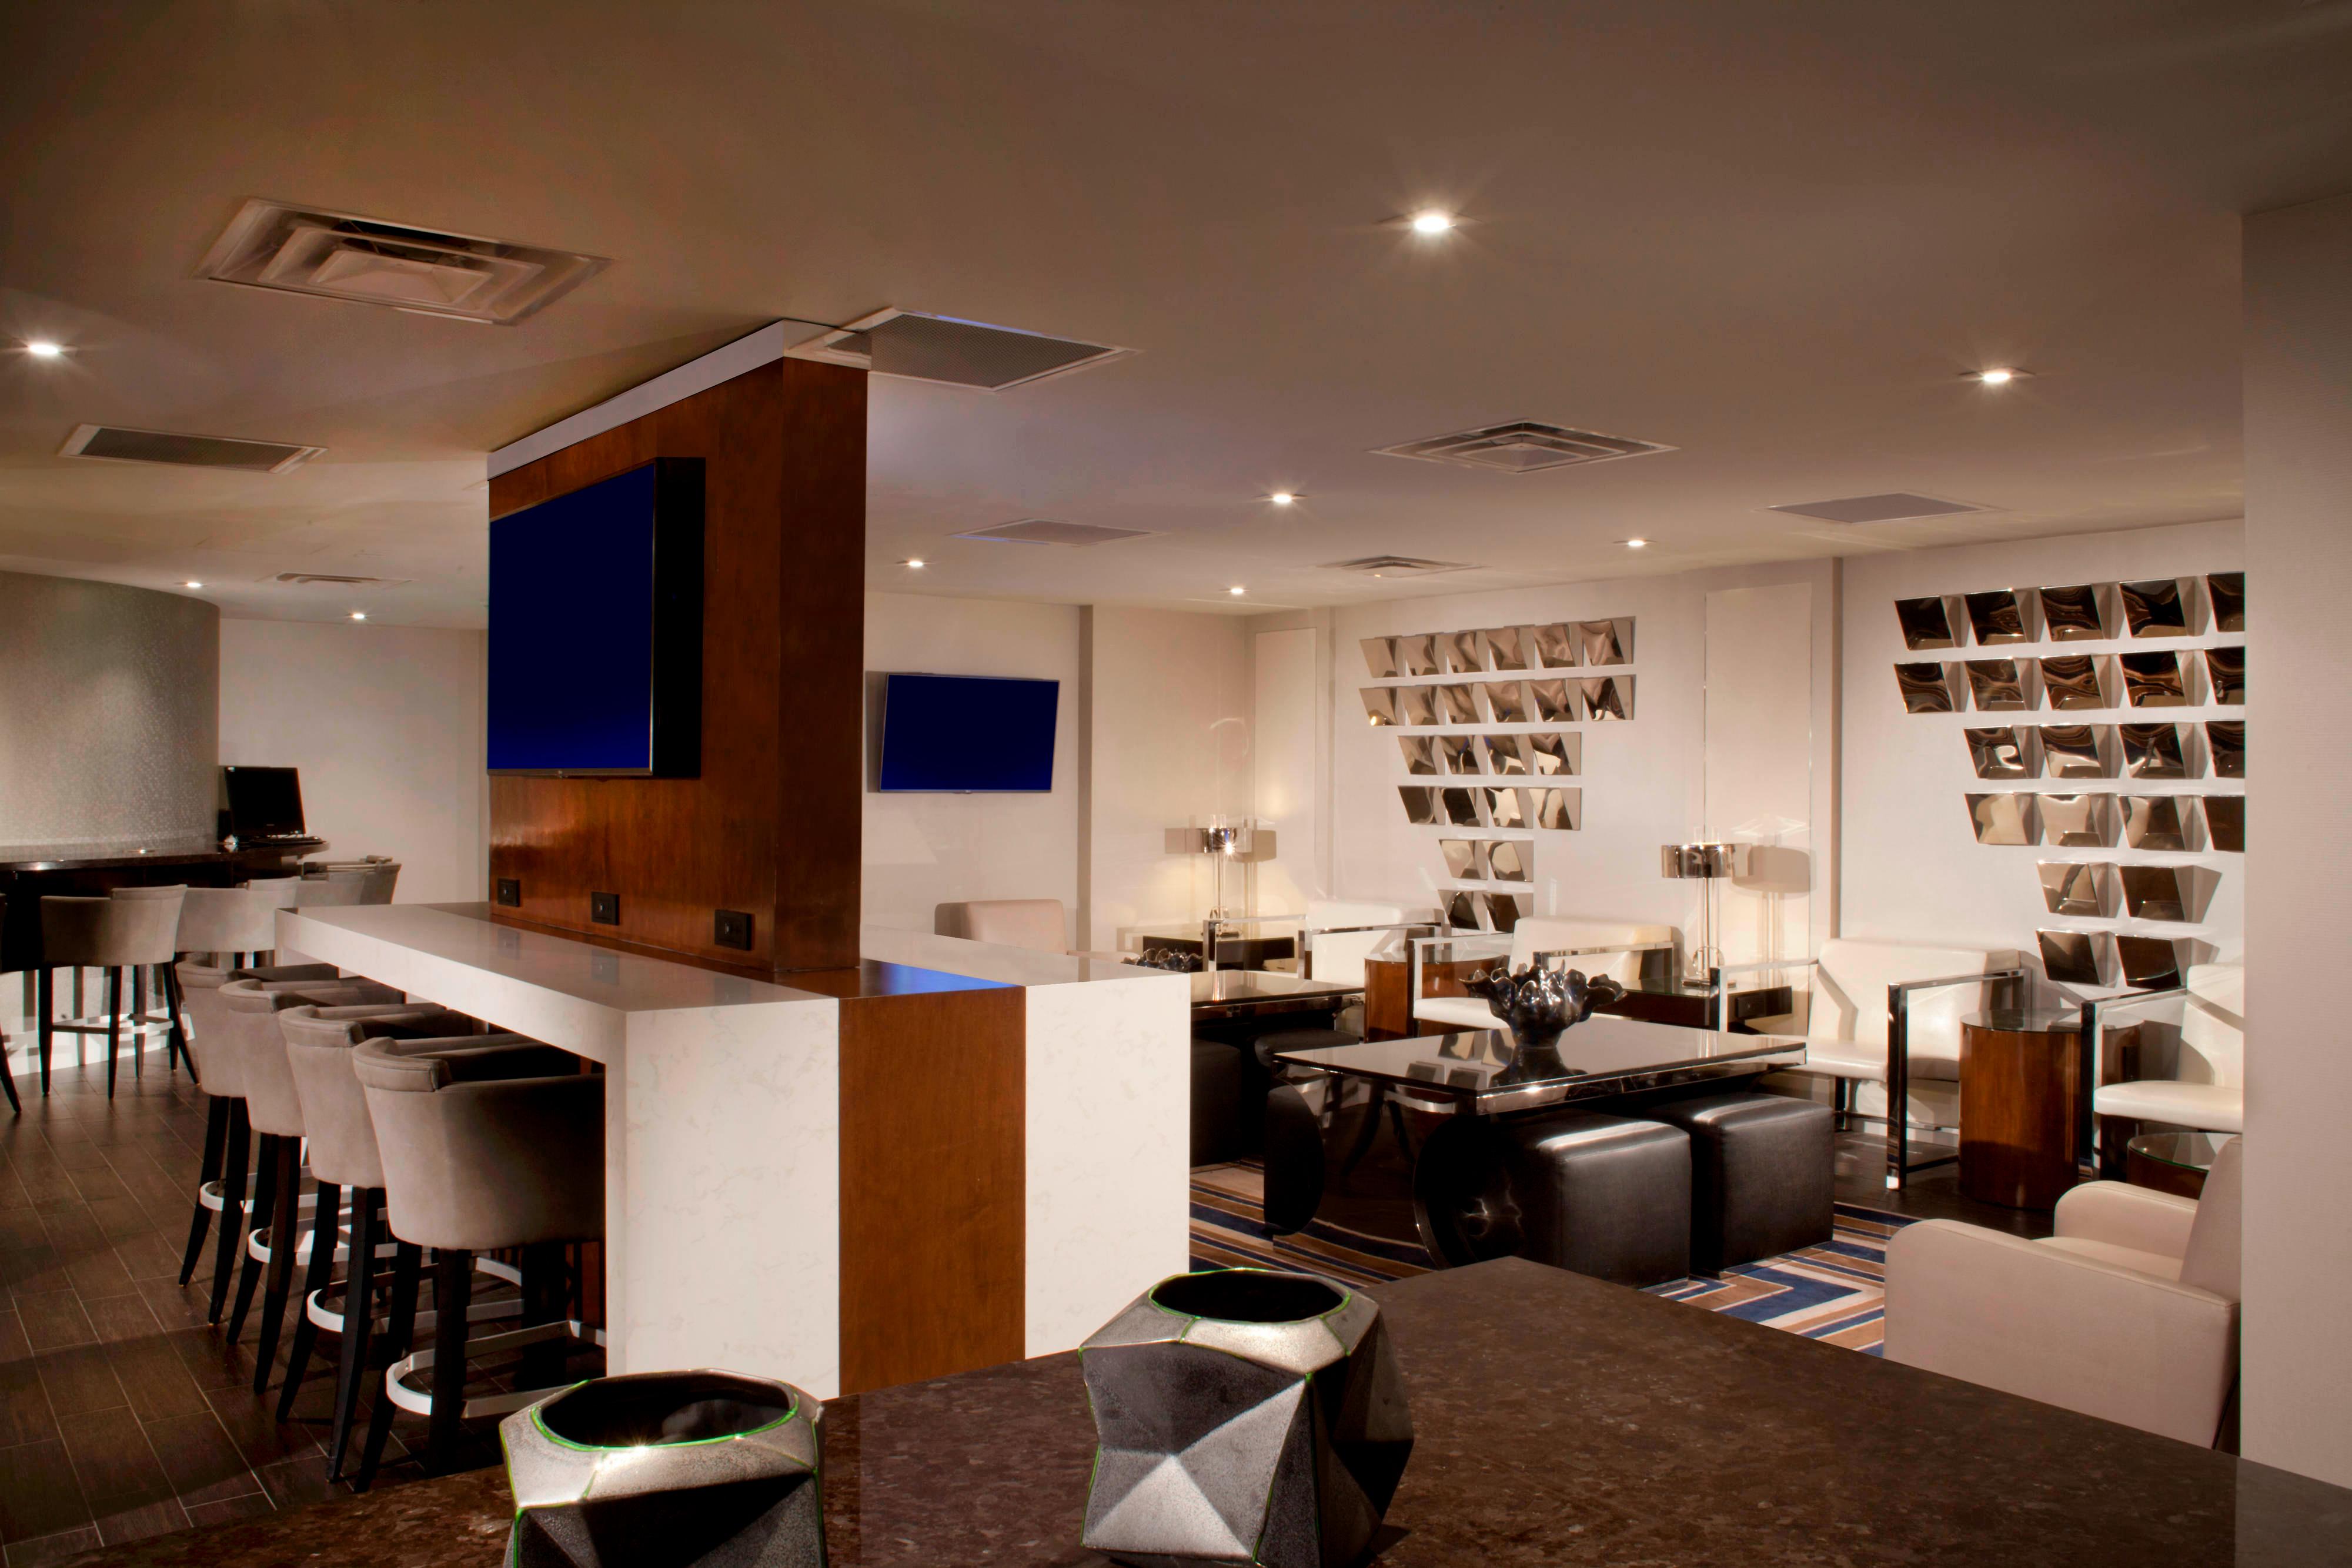 Executive lounge seating area with flatscreen television